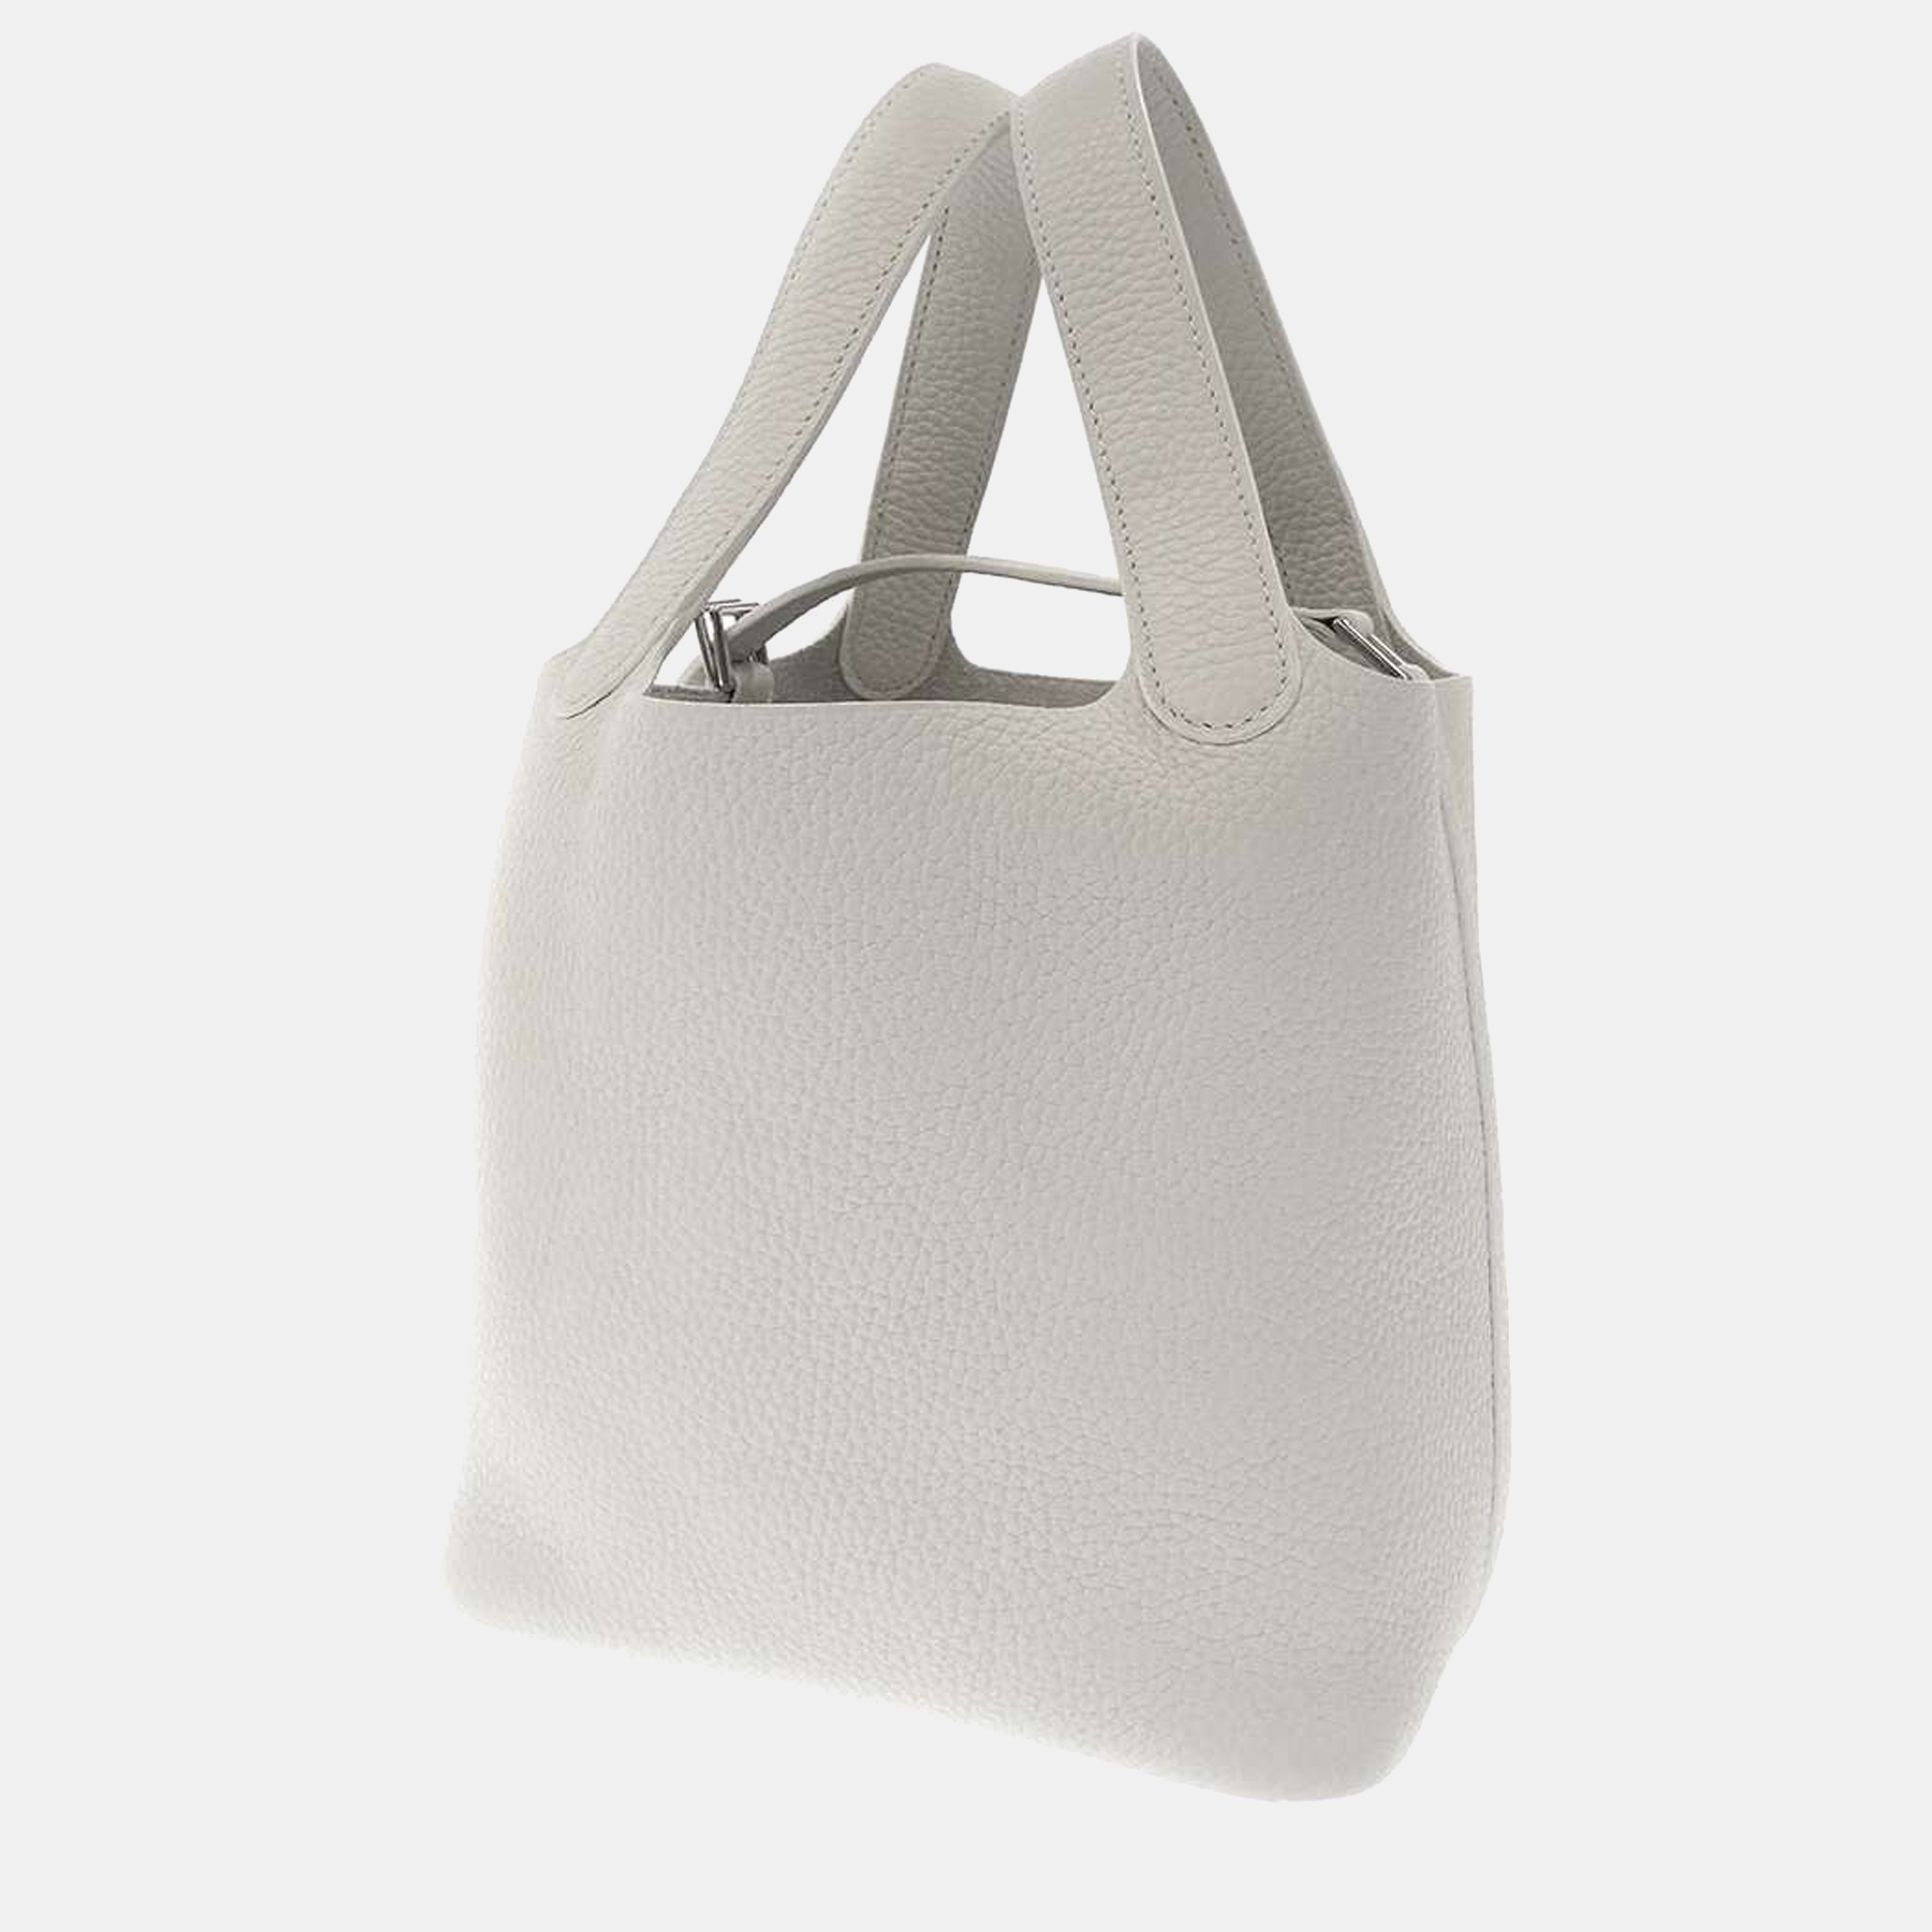 Hermes White Taurillon Clemence Leather Picotin Lock PM Tote Bag